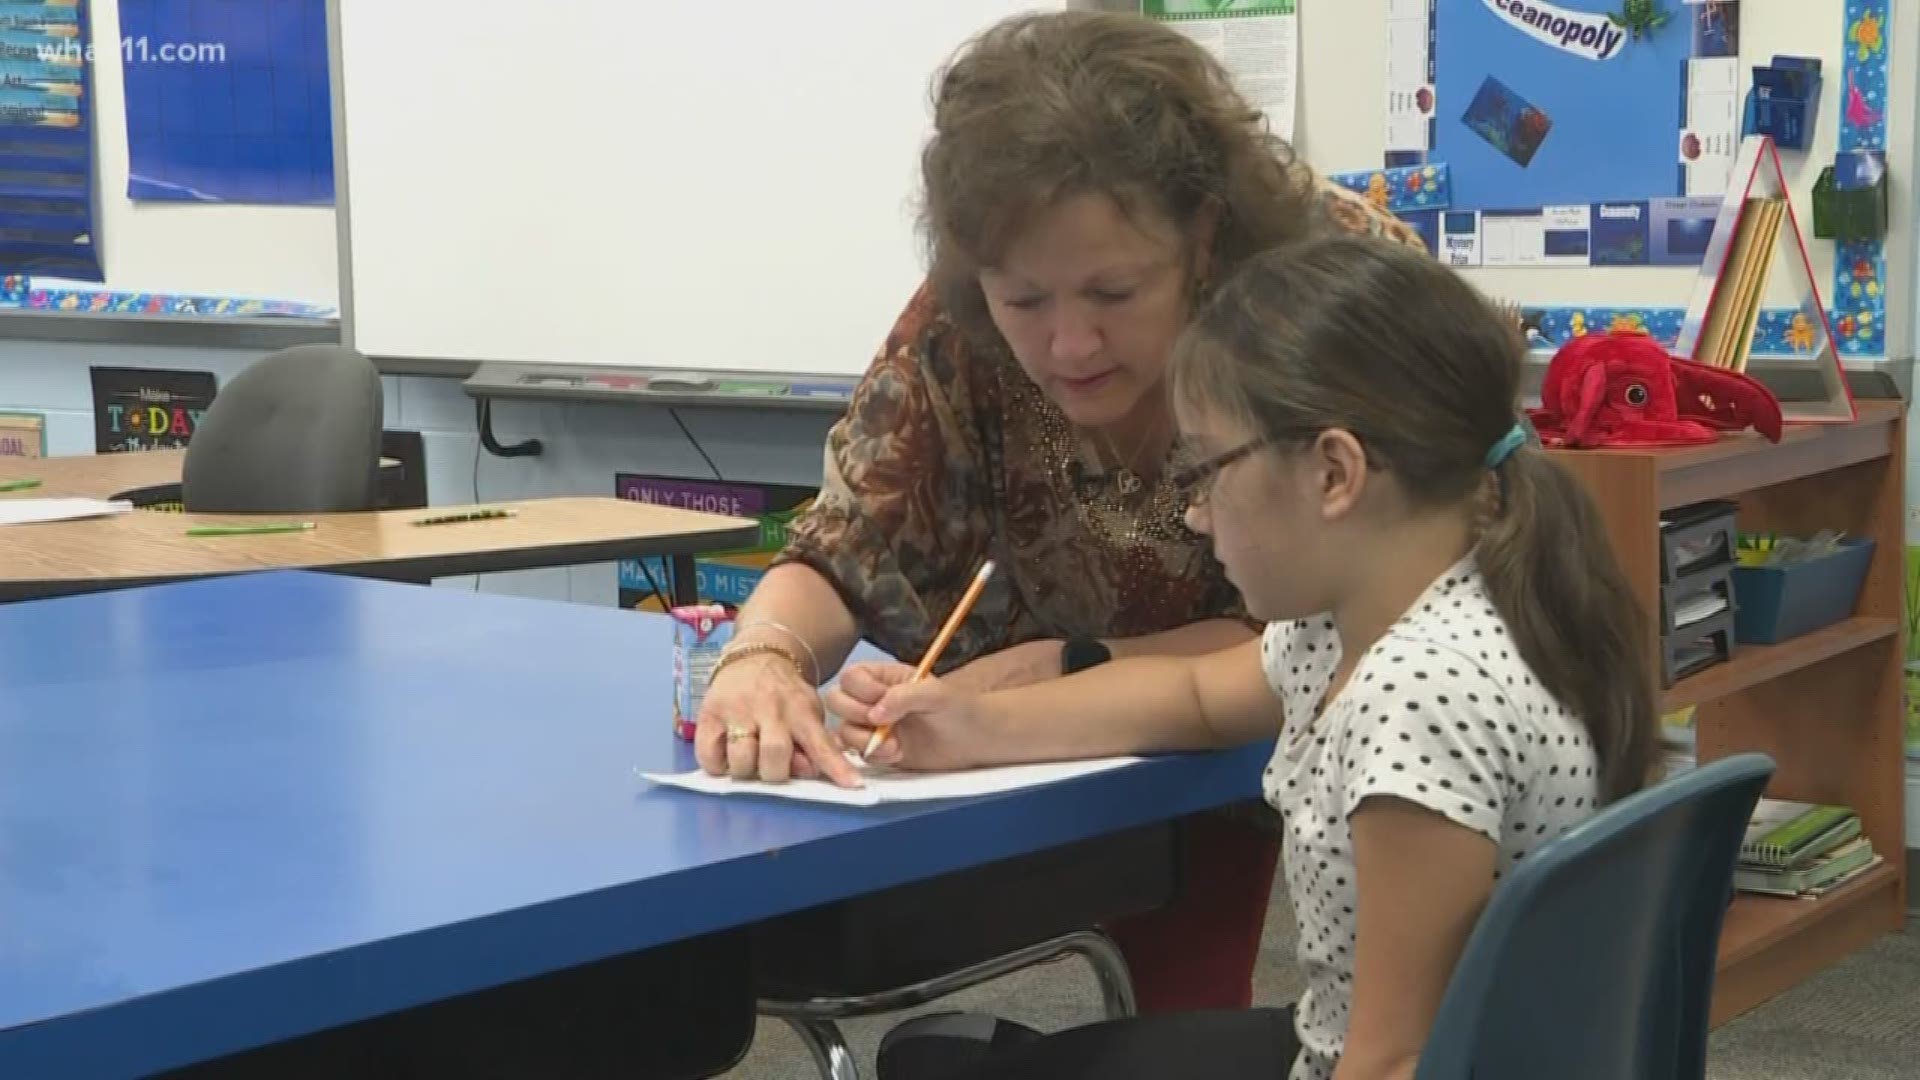 New Albany Floyd County schools have a shorter summer break to help kids retain what they learn